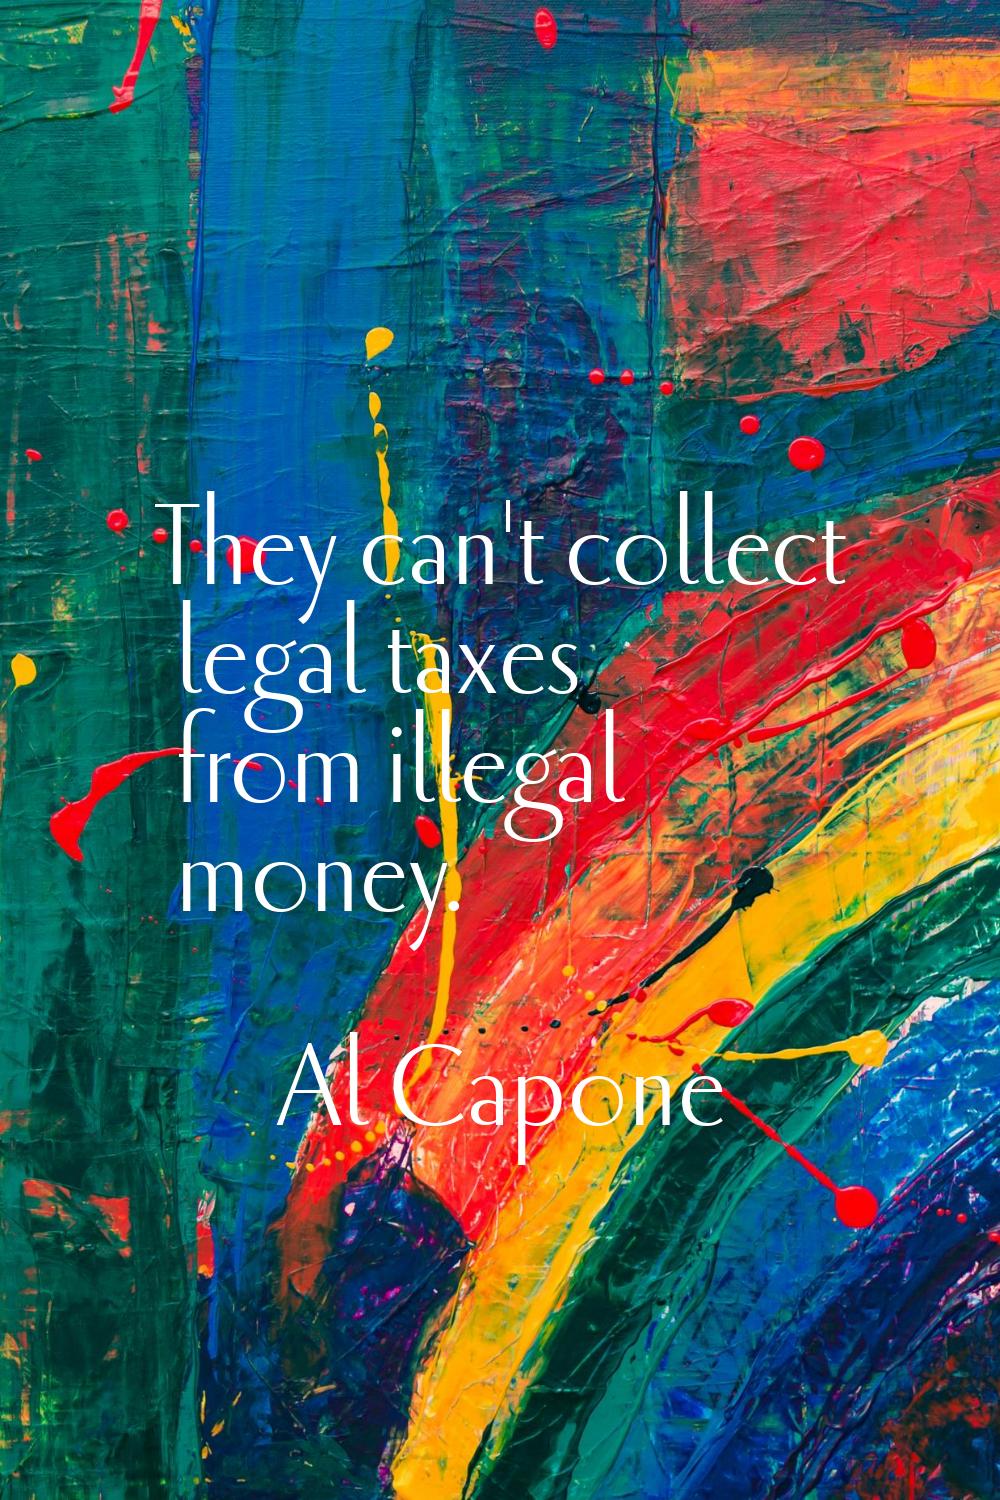 They can't collect legal taxes from illegal money.